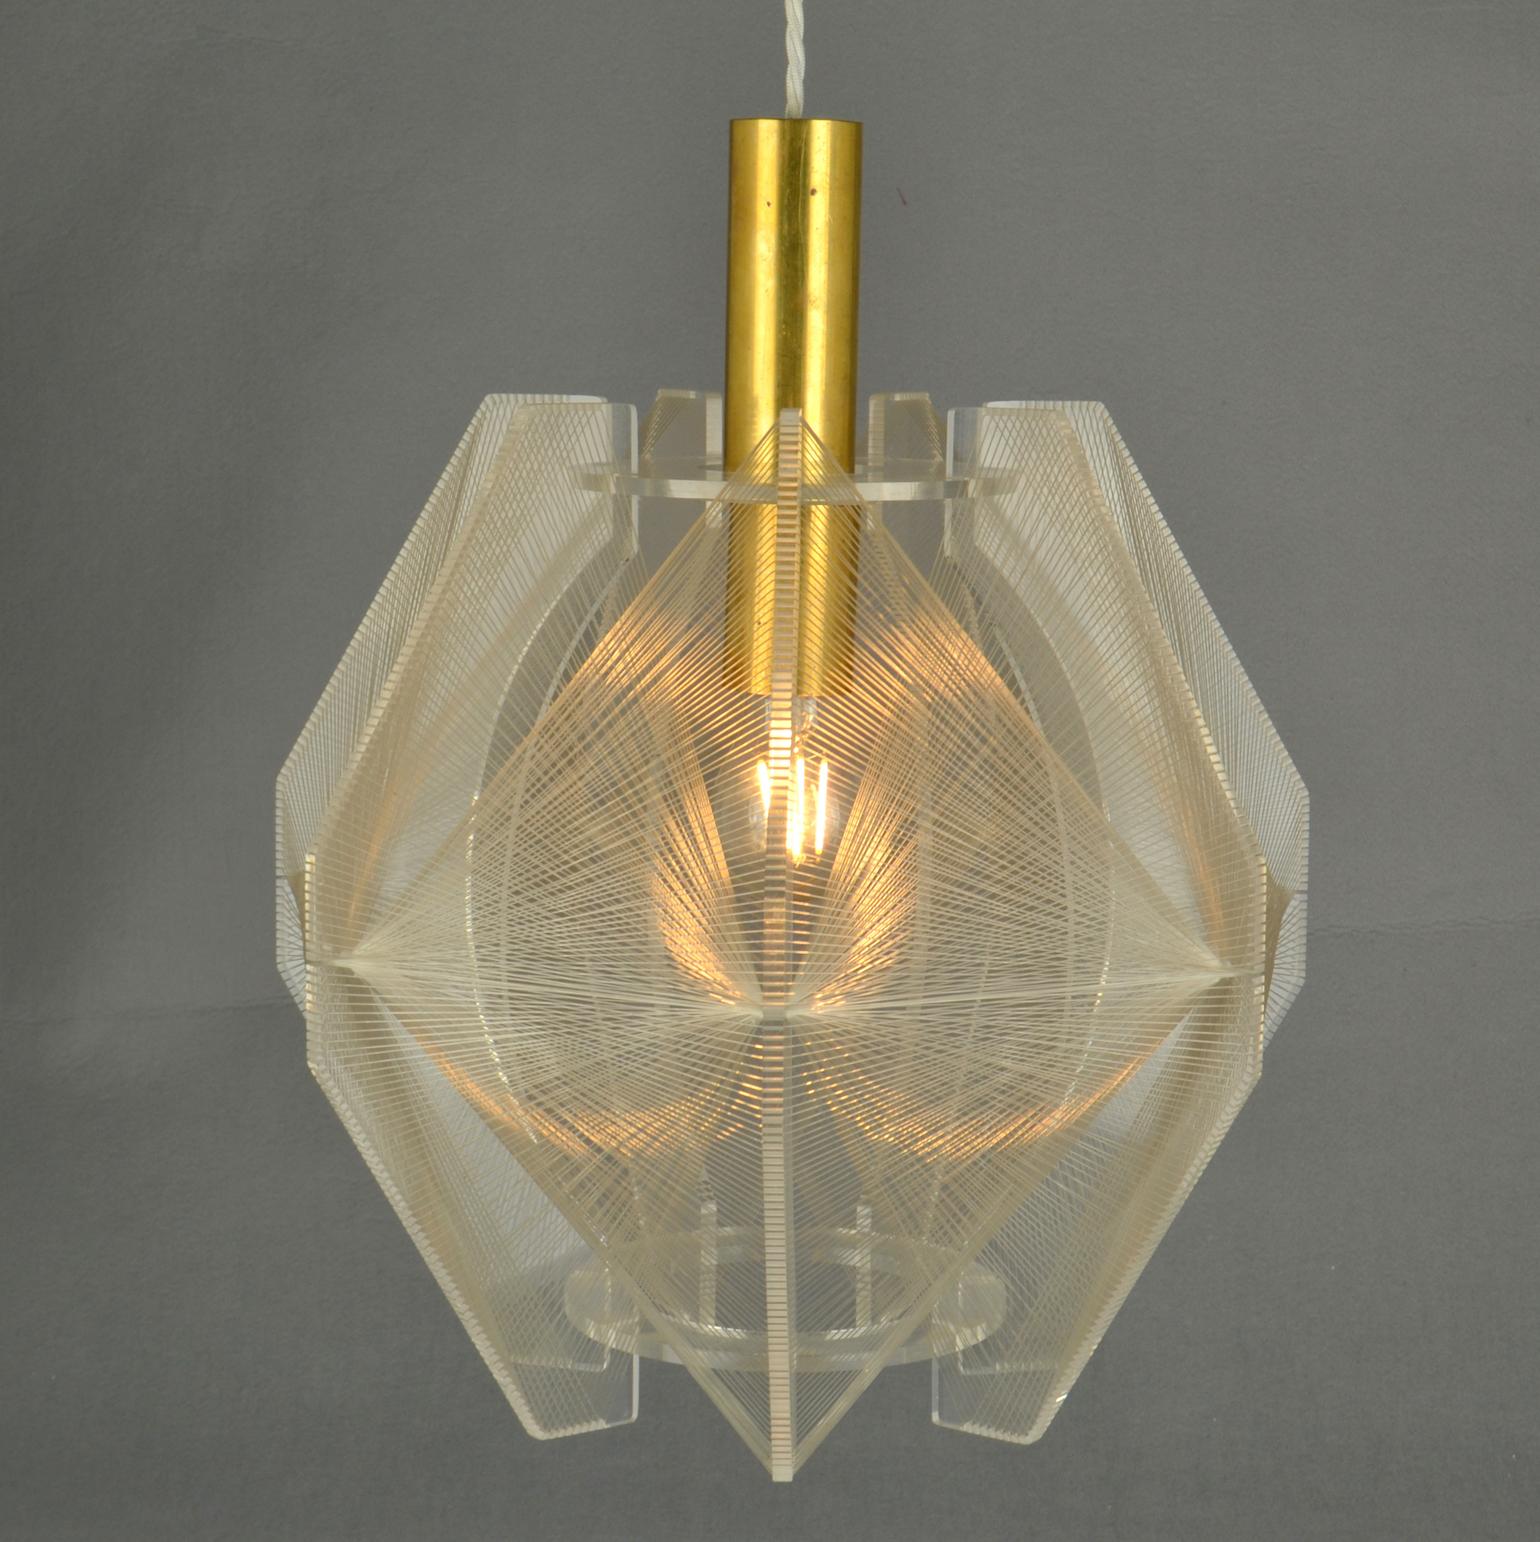 European Pendant Lamp in Lucite, Wire and Brass, 1970's For Sale